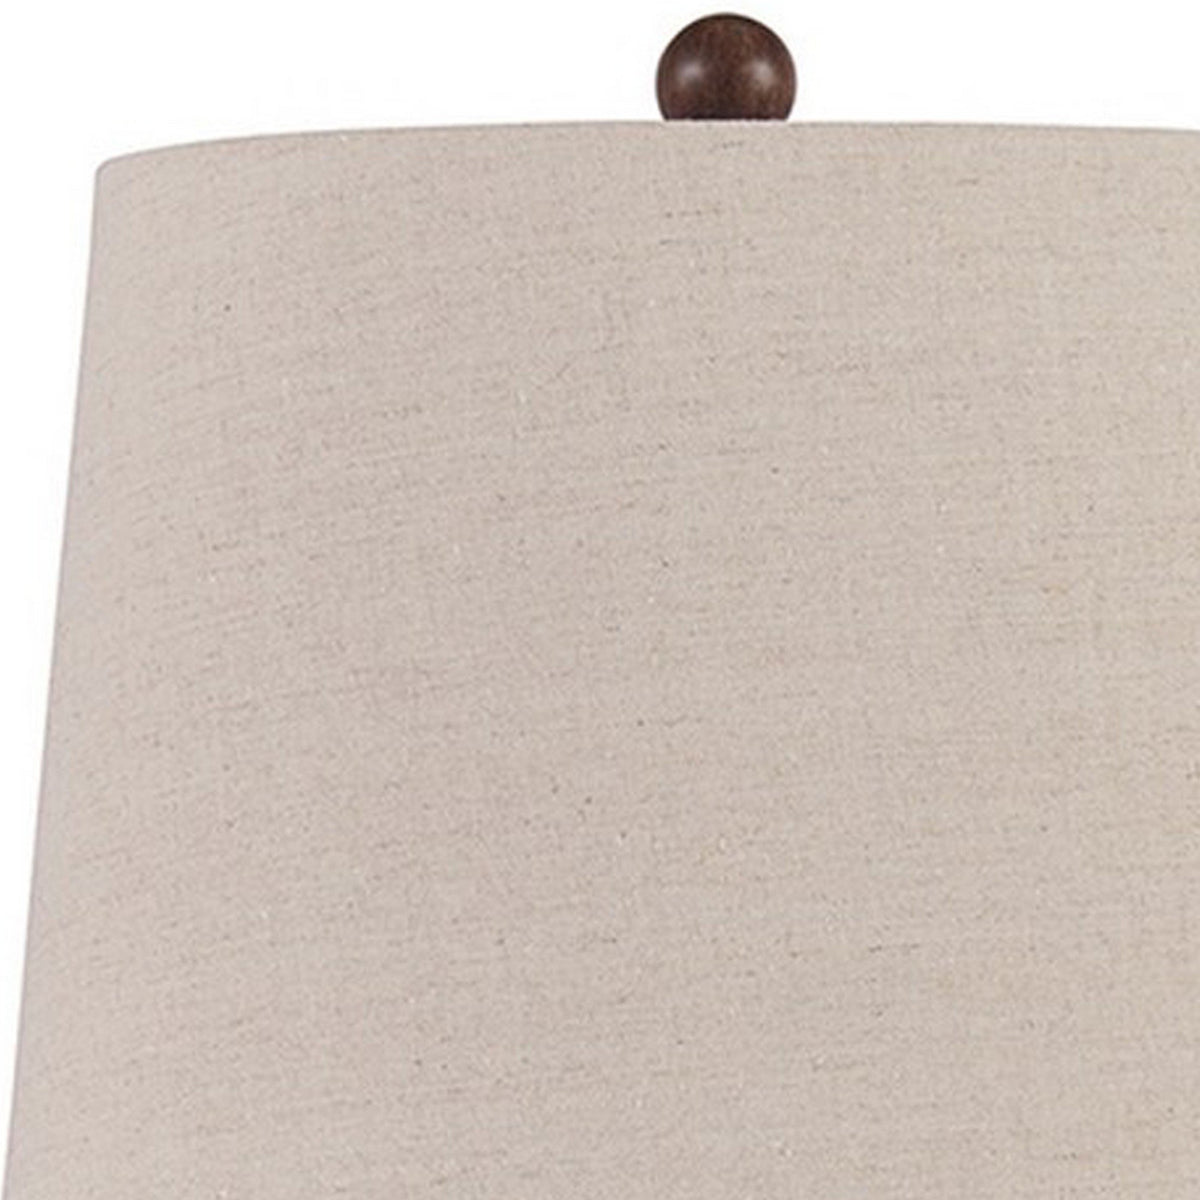 Tapered Fabric Shade Table Lamp with Turned Base, Set of 2, Gray and Brown - BM230966